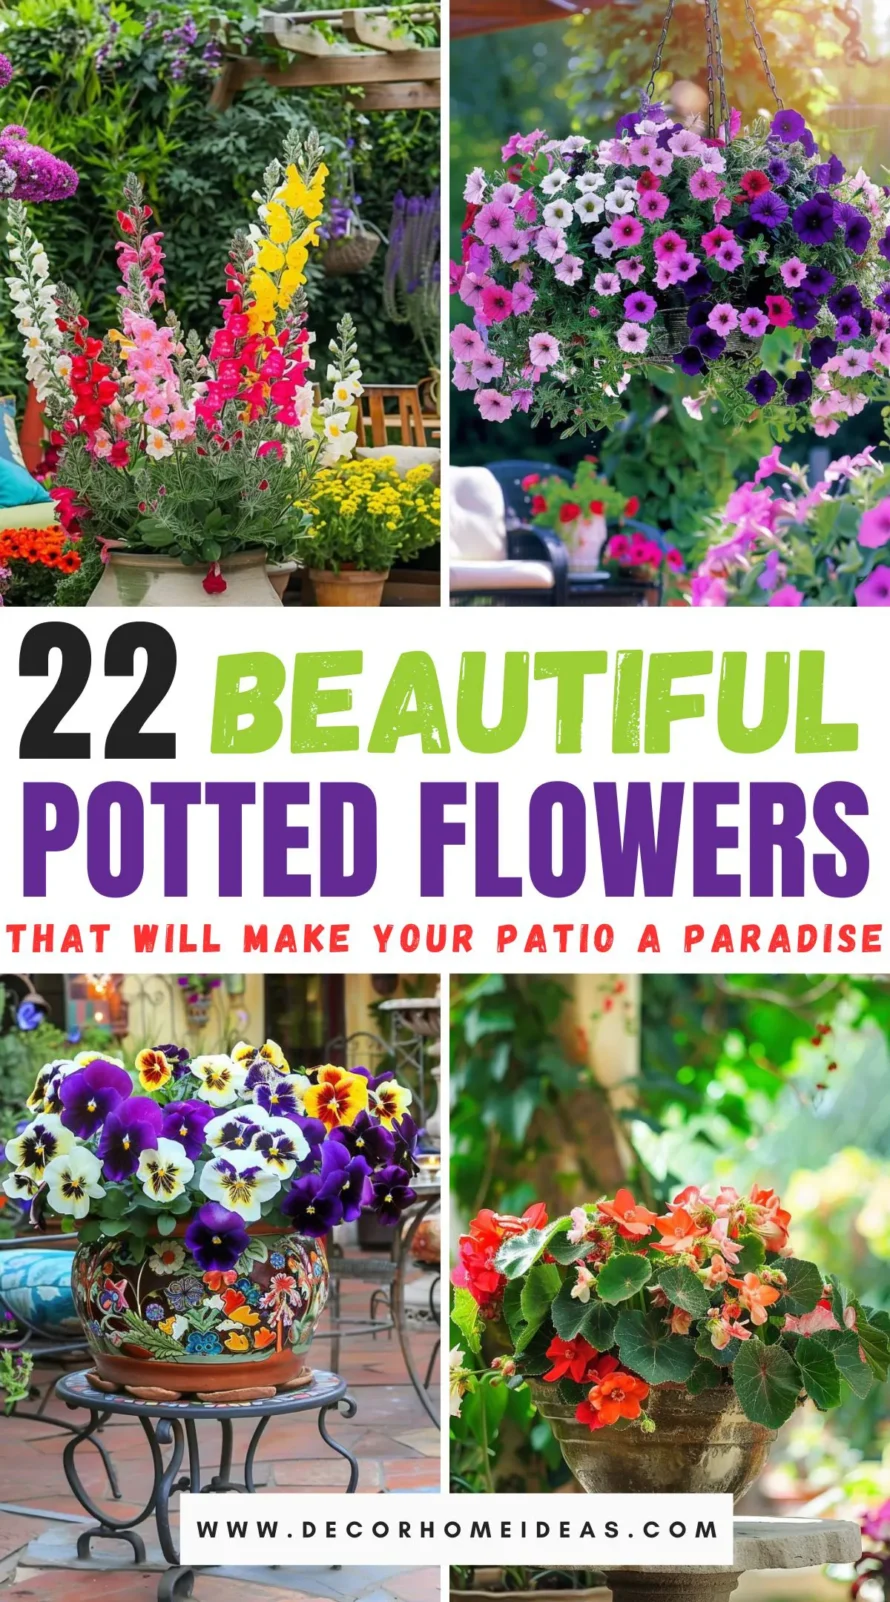 Transform your patio into a paradise retreat with our guide to 22 stunning potted flowers. Discover vibrant blooms that thrive in pots, perfect for adding color and charm to your outdoor space. From fragrant florals to hardy plants, learn which varieties will make your patio an inviting haven.